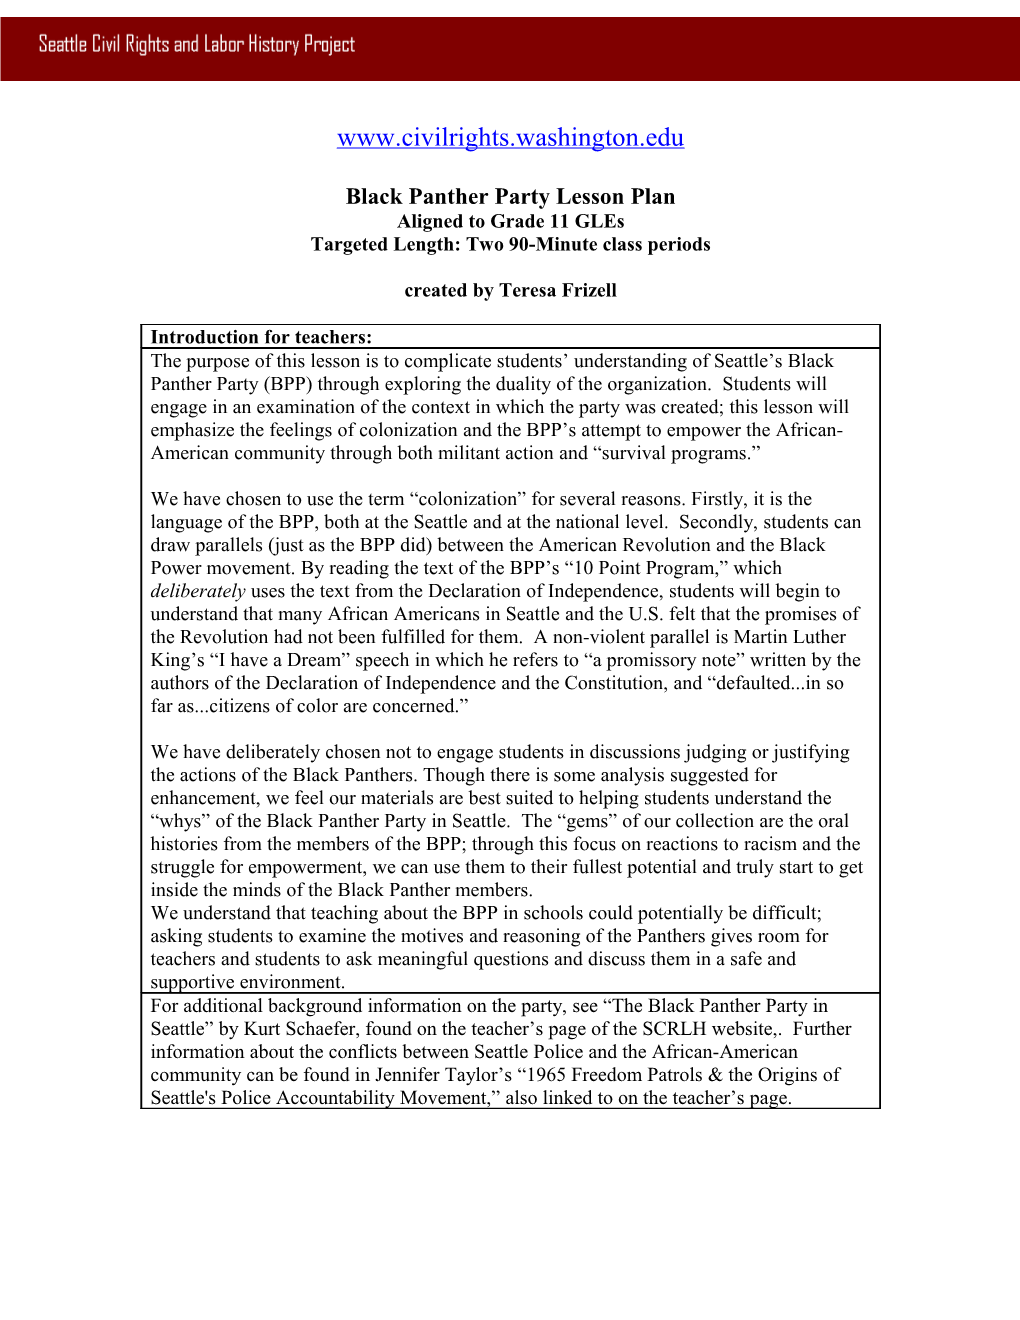 Black Panther Party Lesson Plan